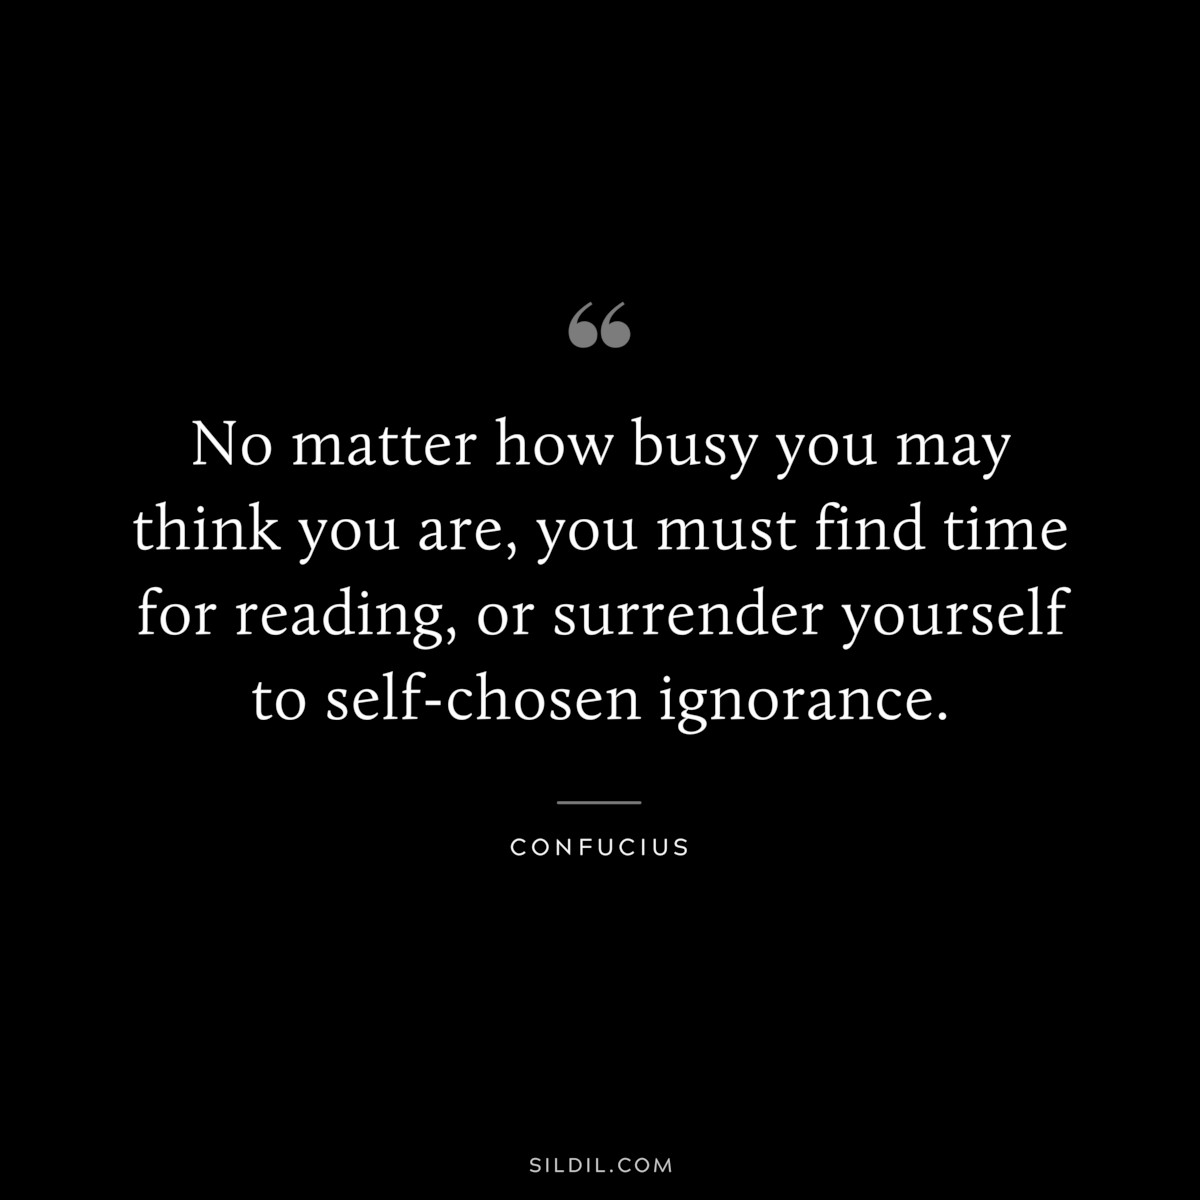 No matter how busy you may think you are, you must find time for reading, or surrender yourself to self-chosen ignorance. ― Confucius